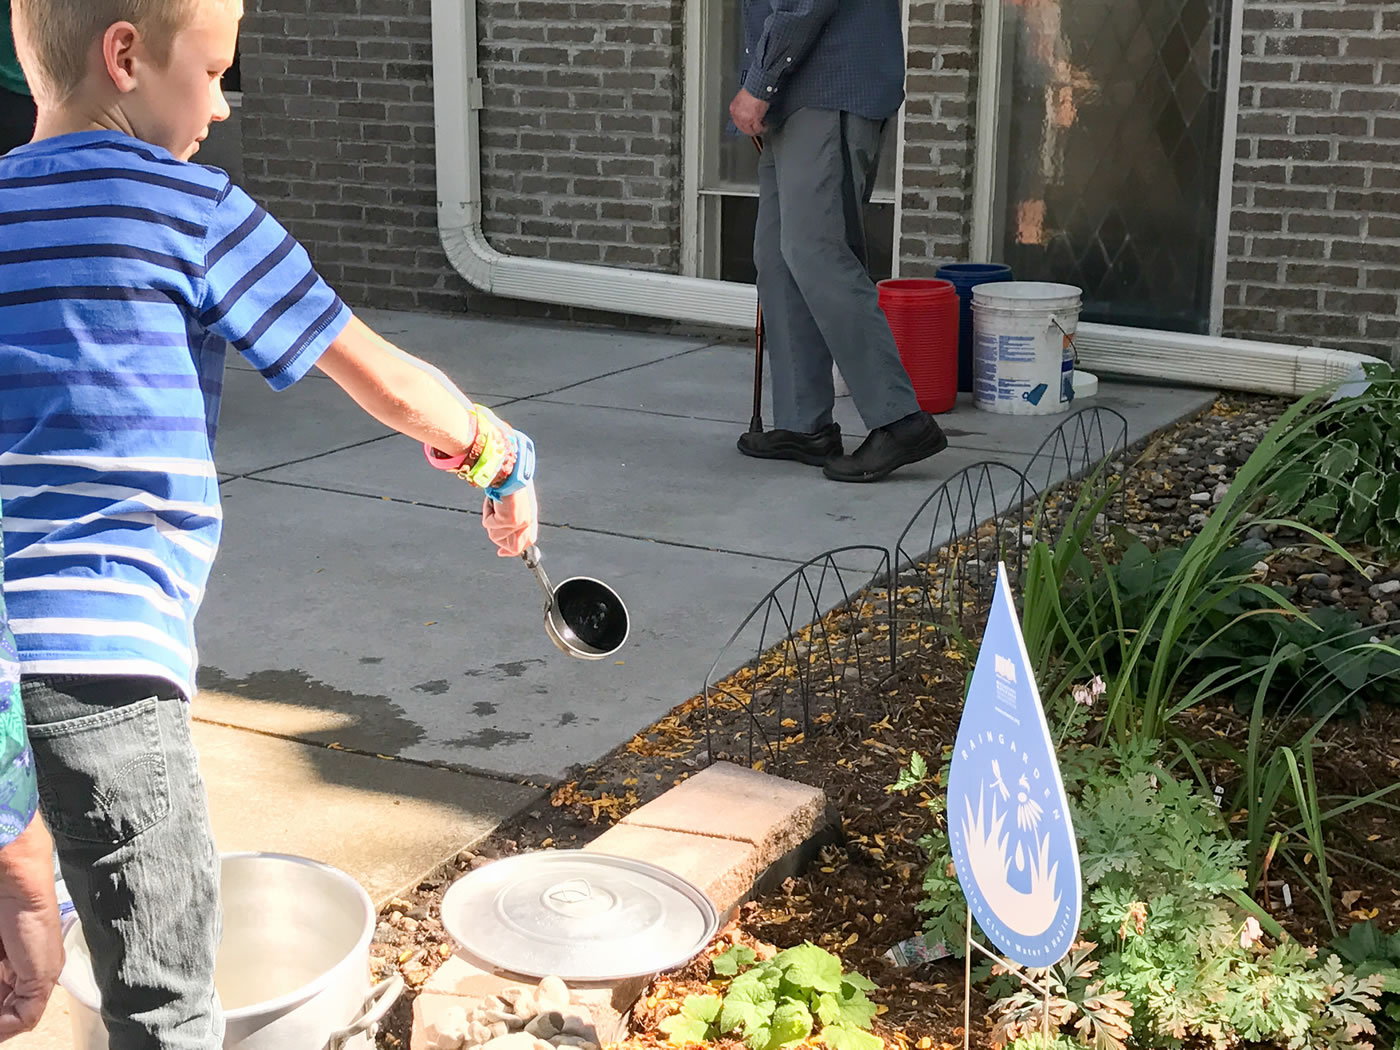 A young church member ladles a spoonful of water onto one of the raingardens.